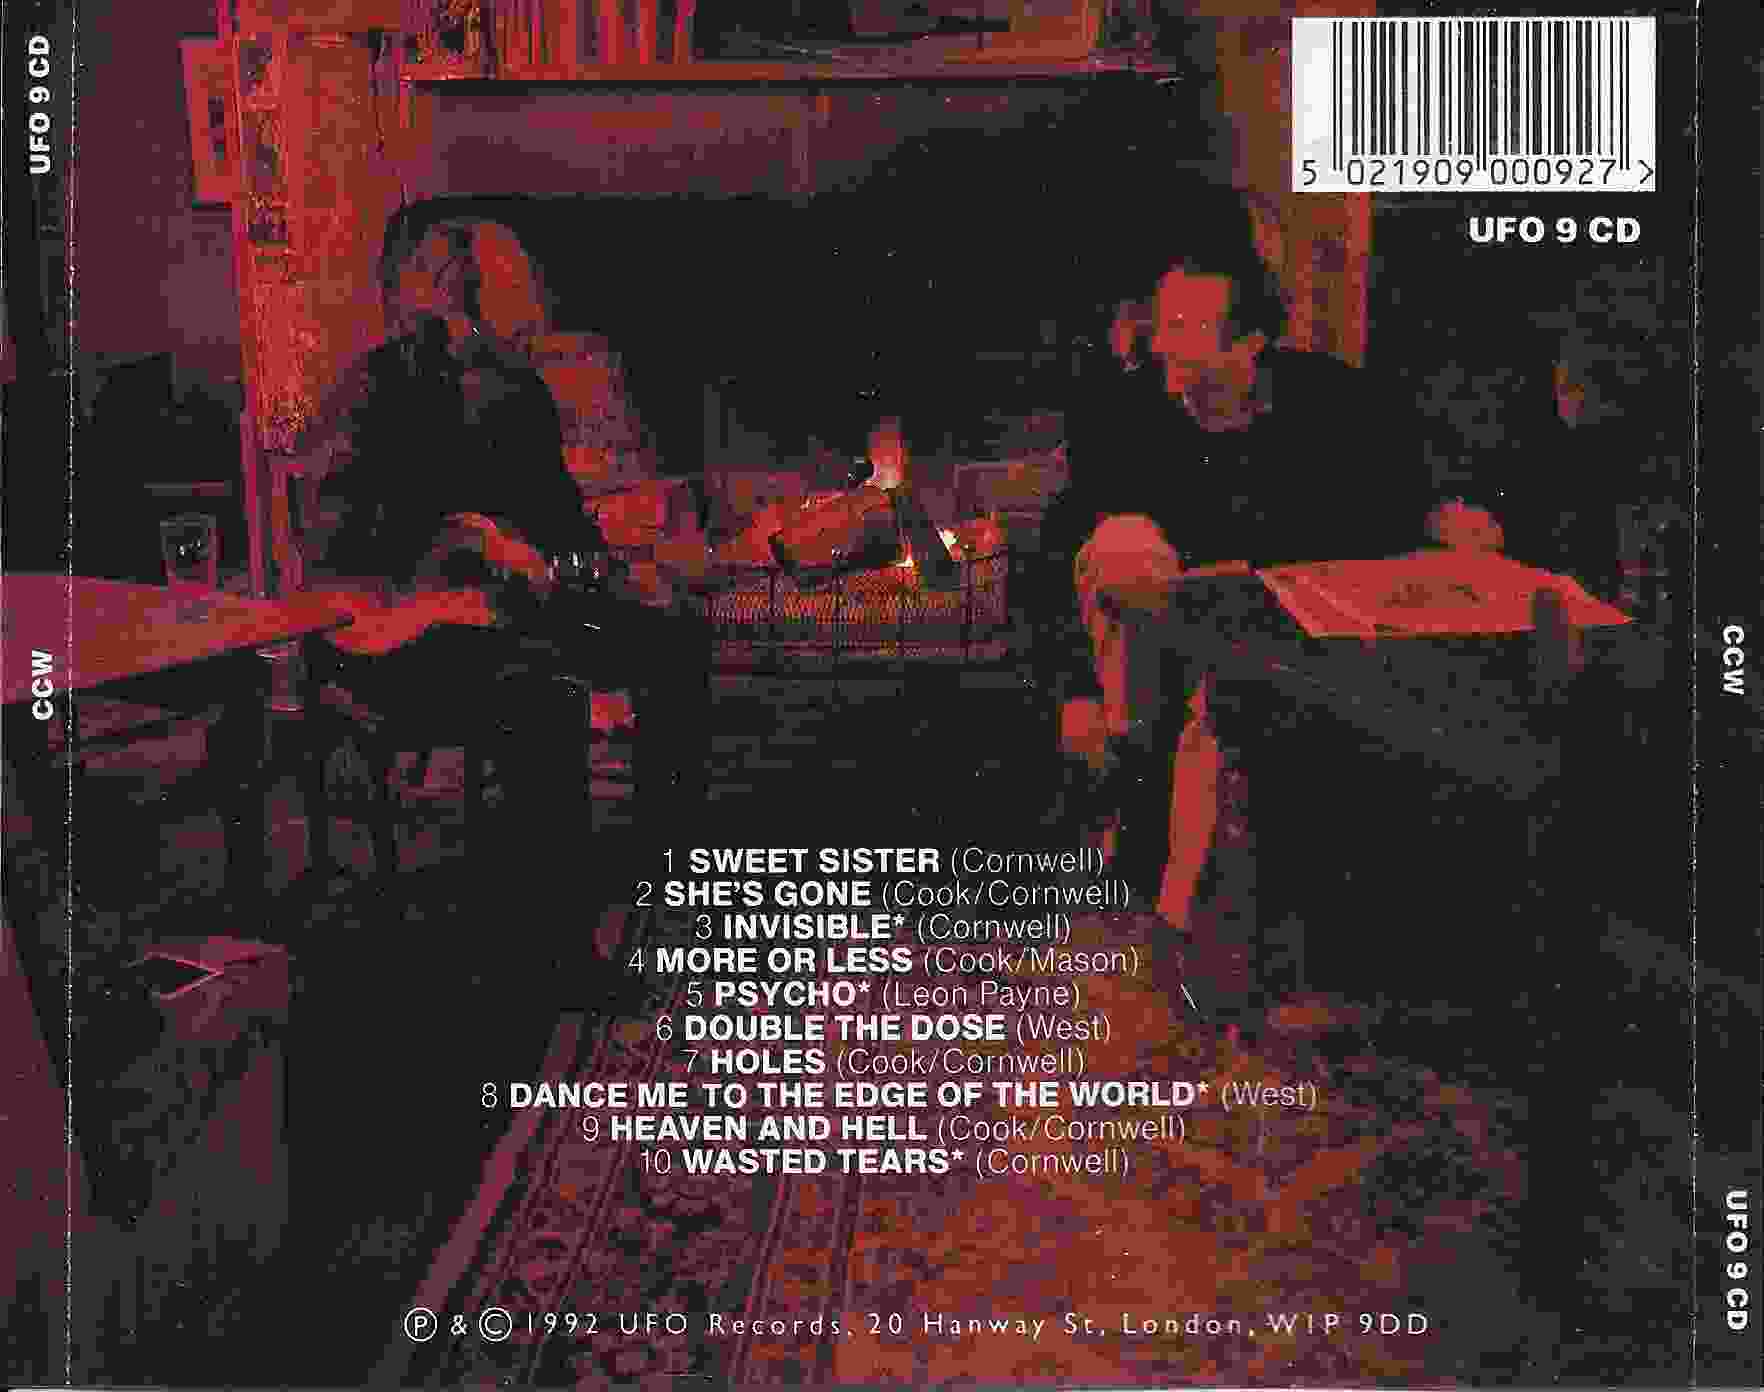 Back cover of UFO 9 CD